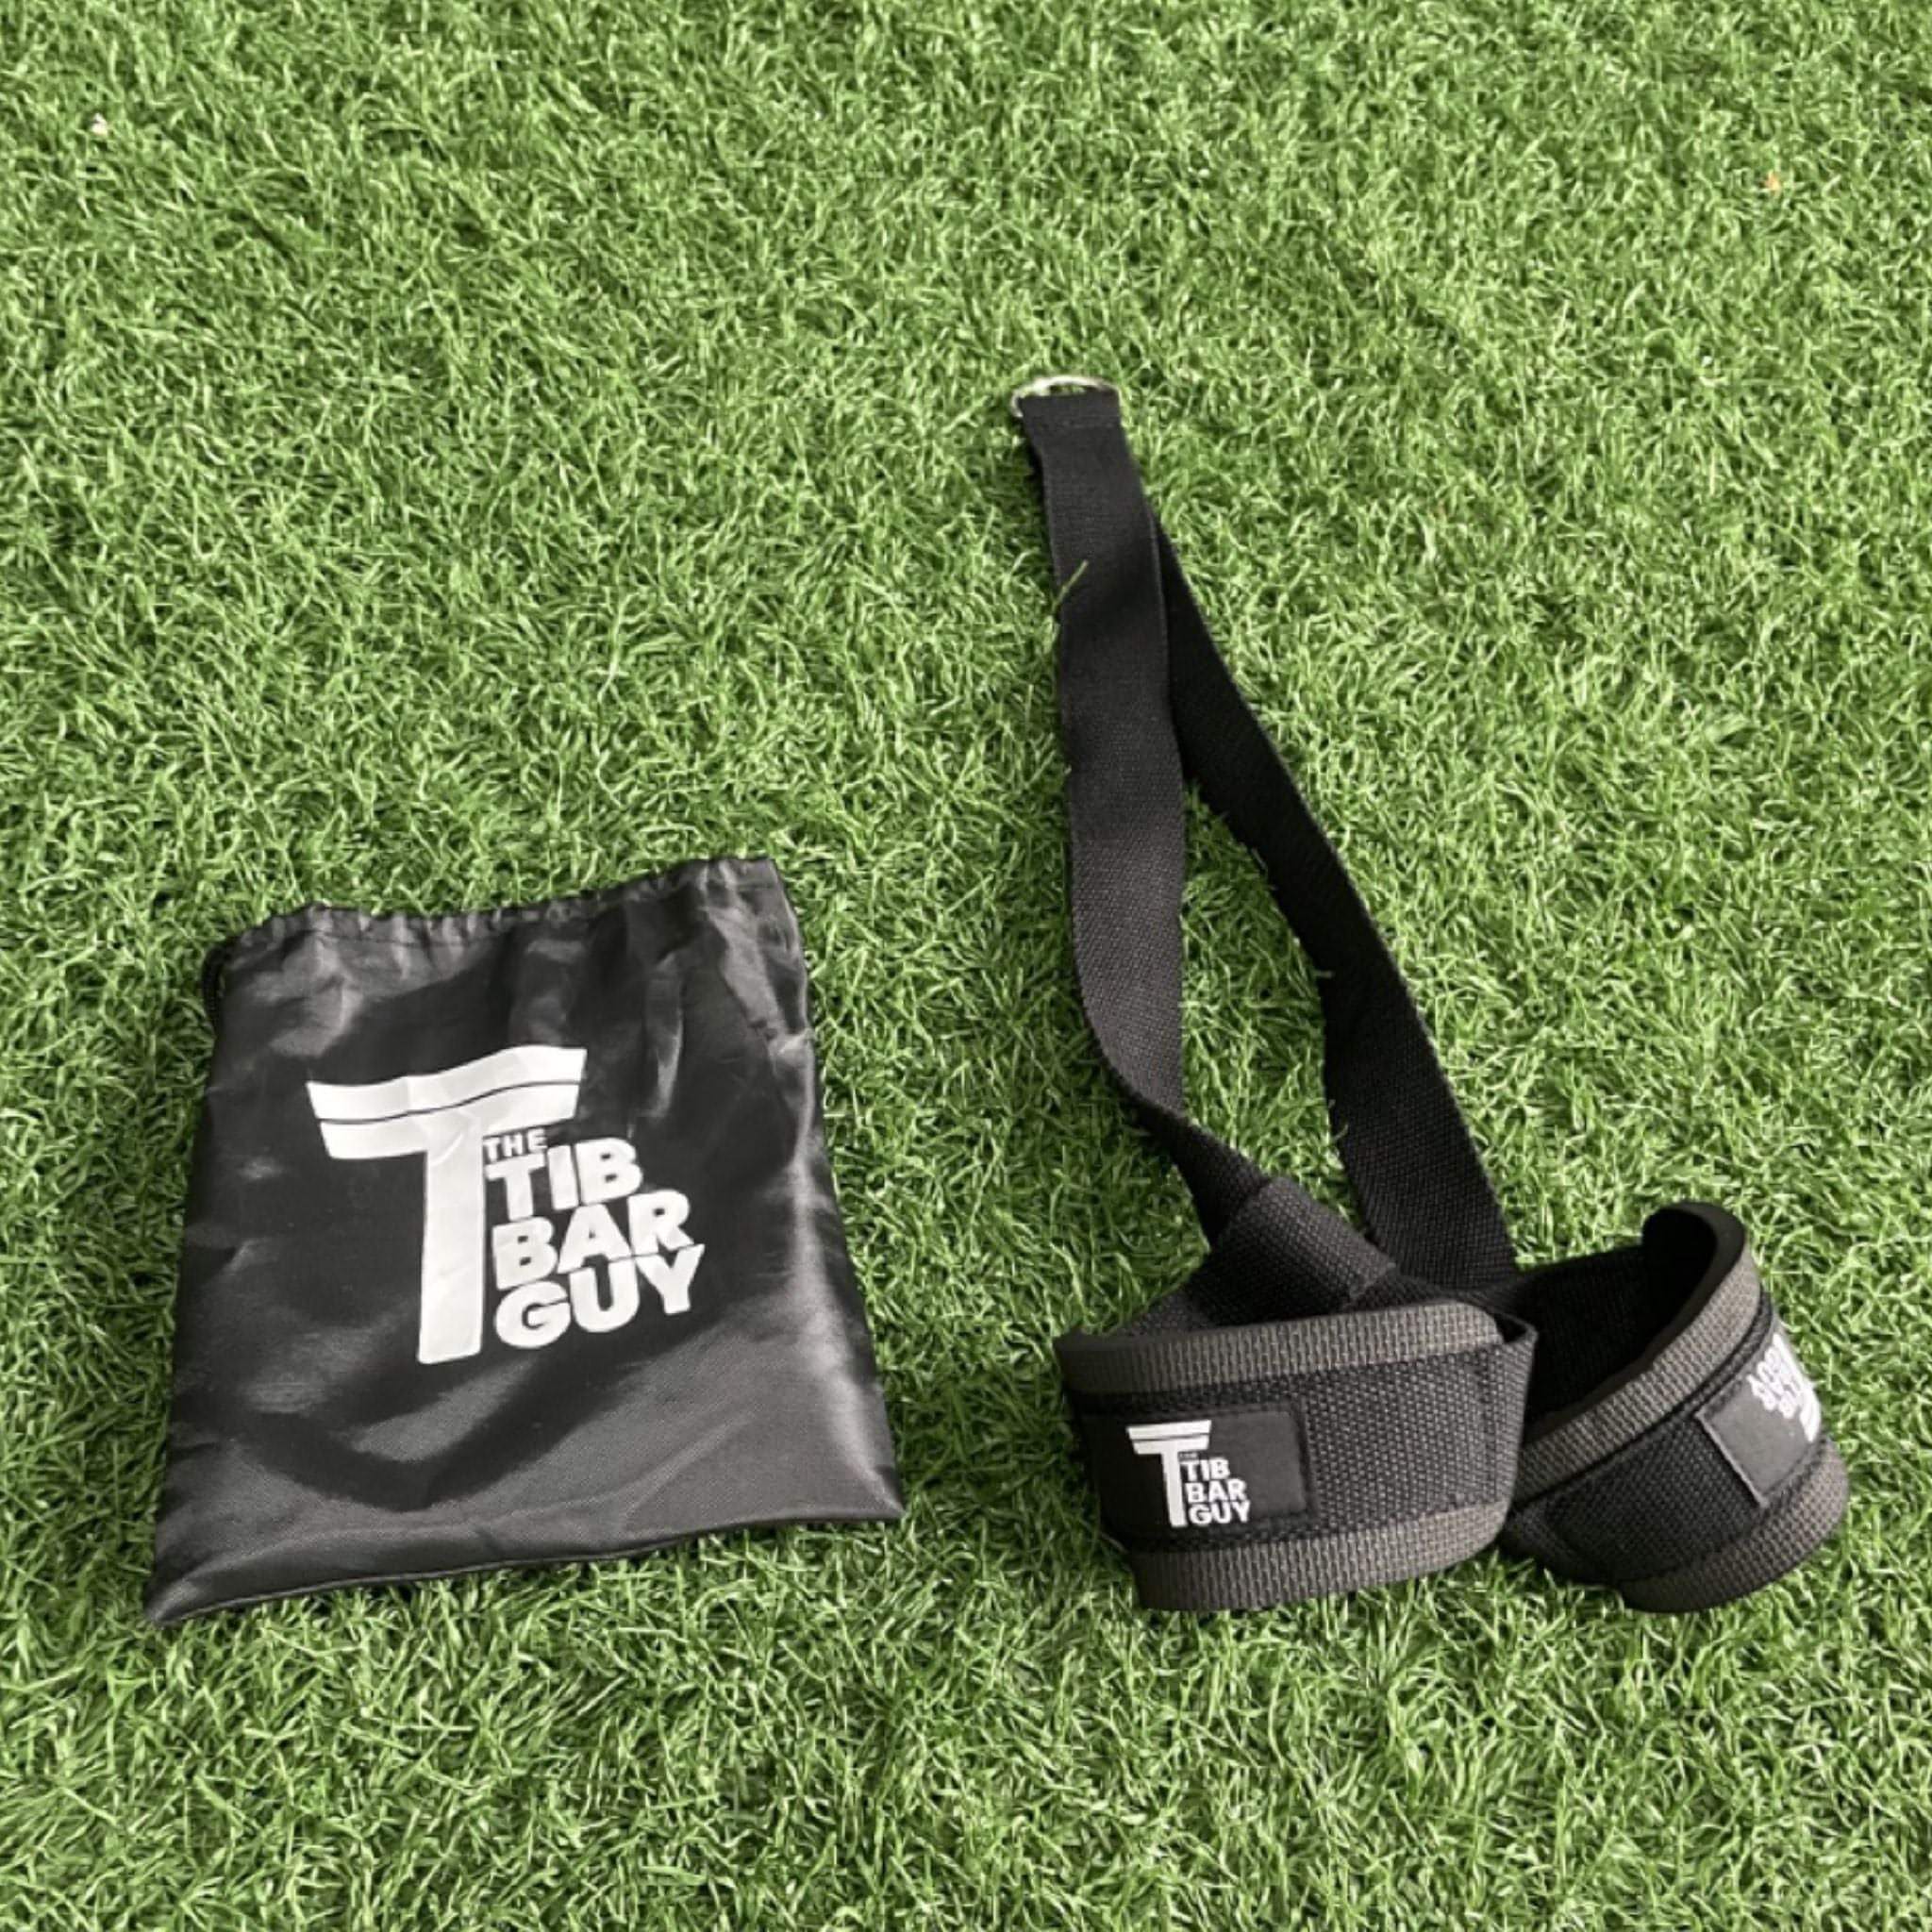 Reverse Squat Strap Designed By The Tib Bar Guy